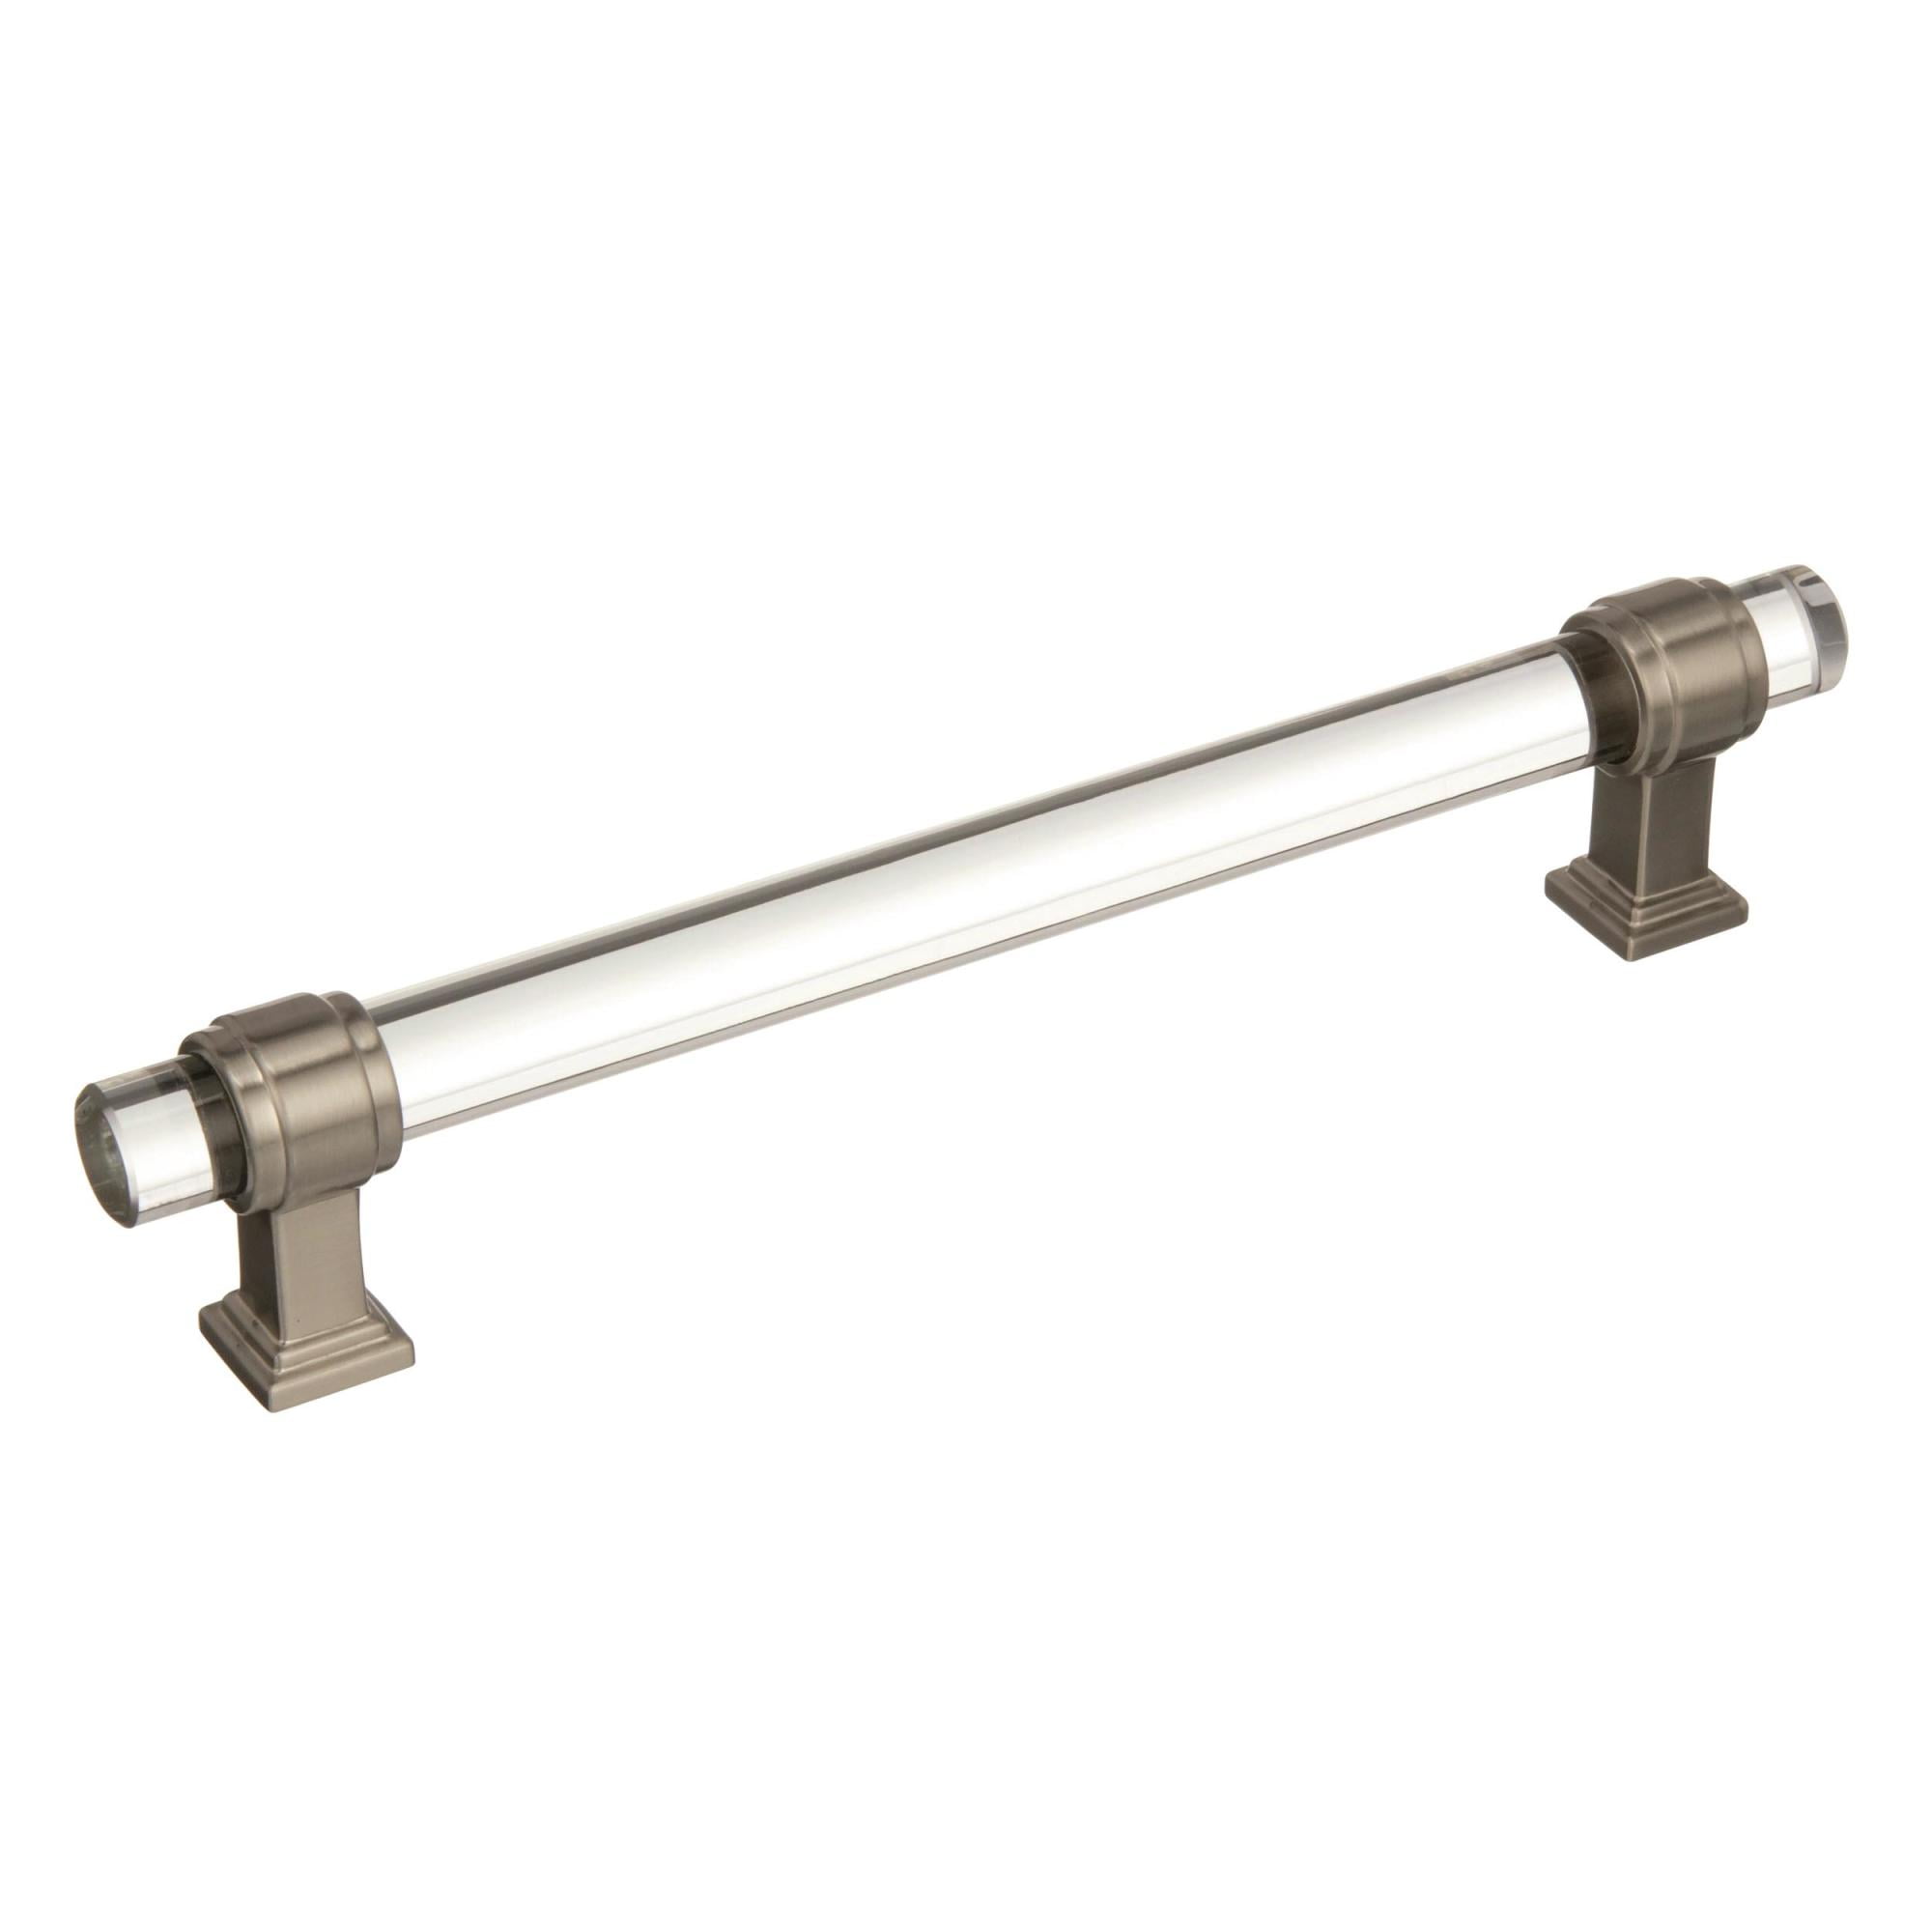 128 mm C-to-C Marble White/Polished Nickel Cabinet Pulls Amerock 5-1/16 in.